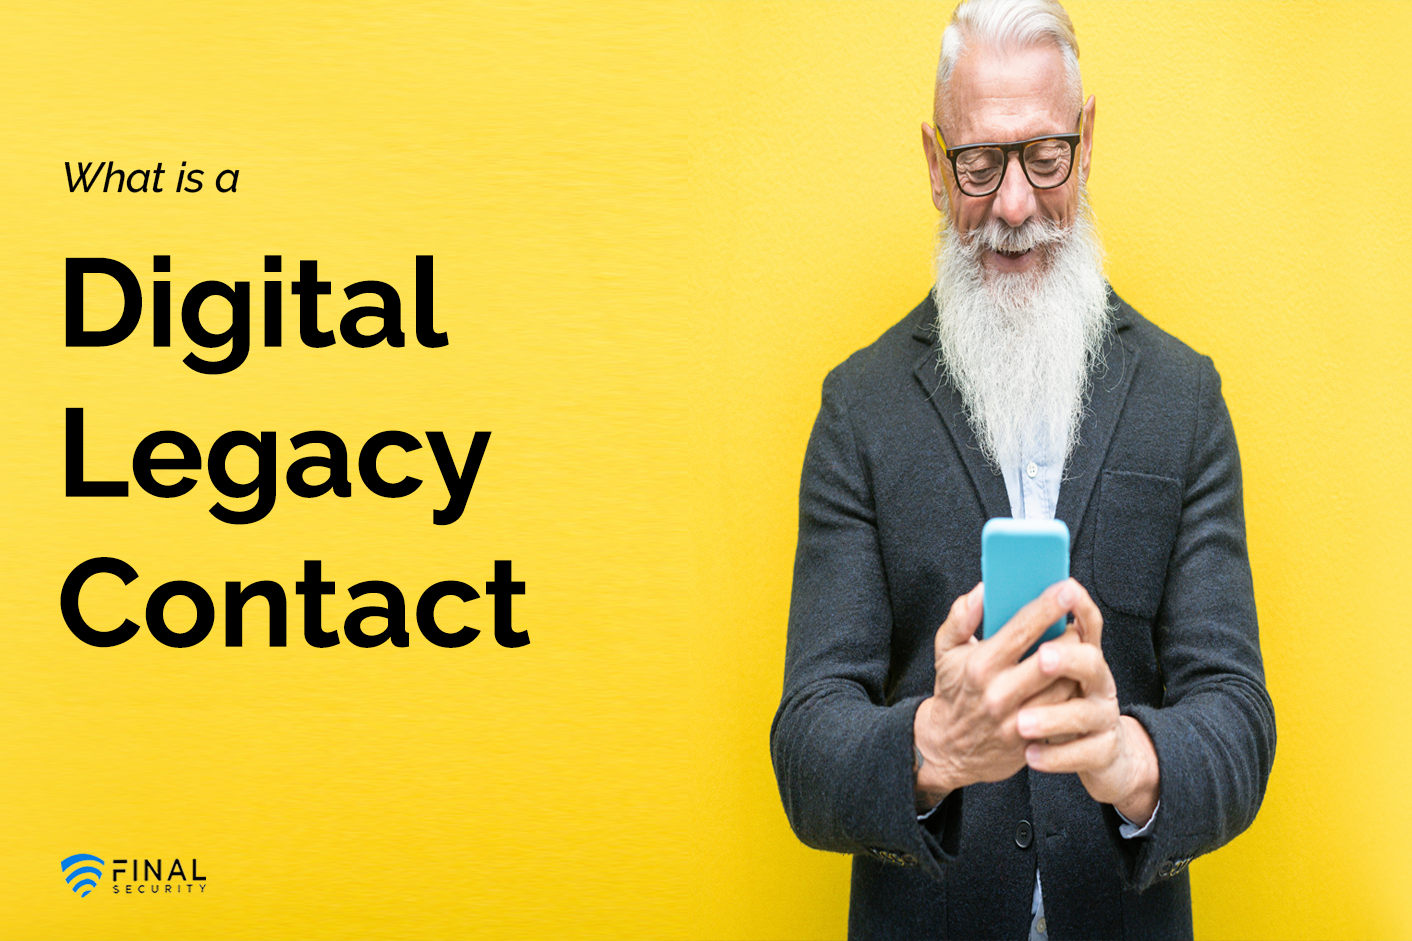 Legacy Contact, Digital Legacy Contact, Digital Legacy, Digital Estate, Digital Legacy Planning, Digital Estate Planning, Info Vault, Important Files, Digital Death, End-of-Life Services, Your Legacy, Legacy Planning, Estate Planning, Financial Planning, Funeral Planning, Preneed Planning